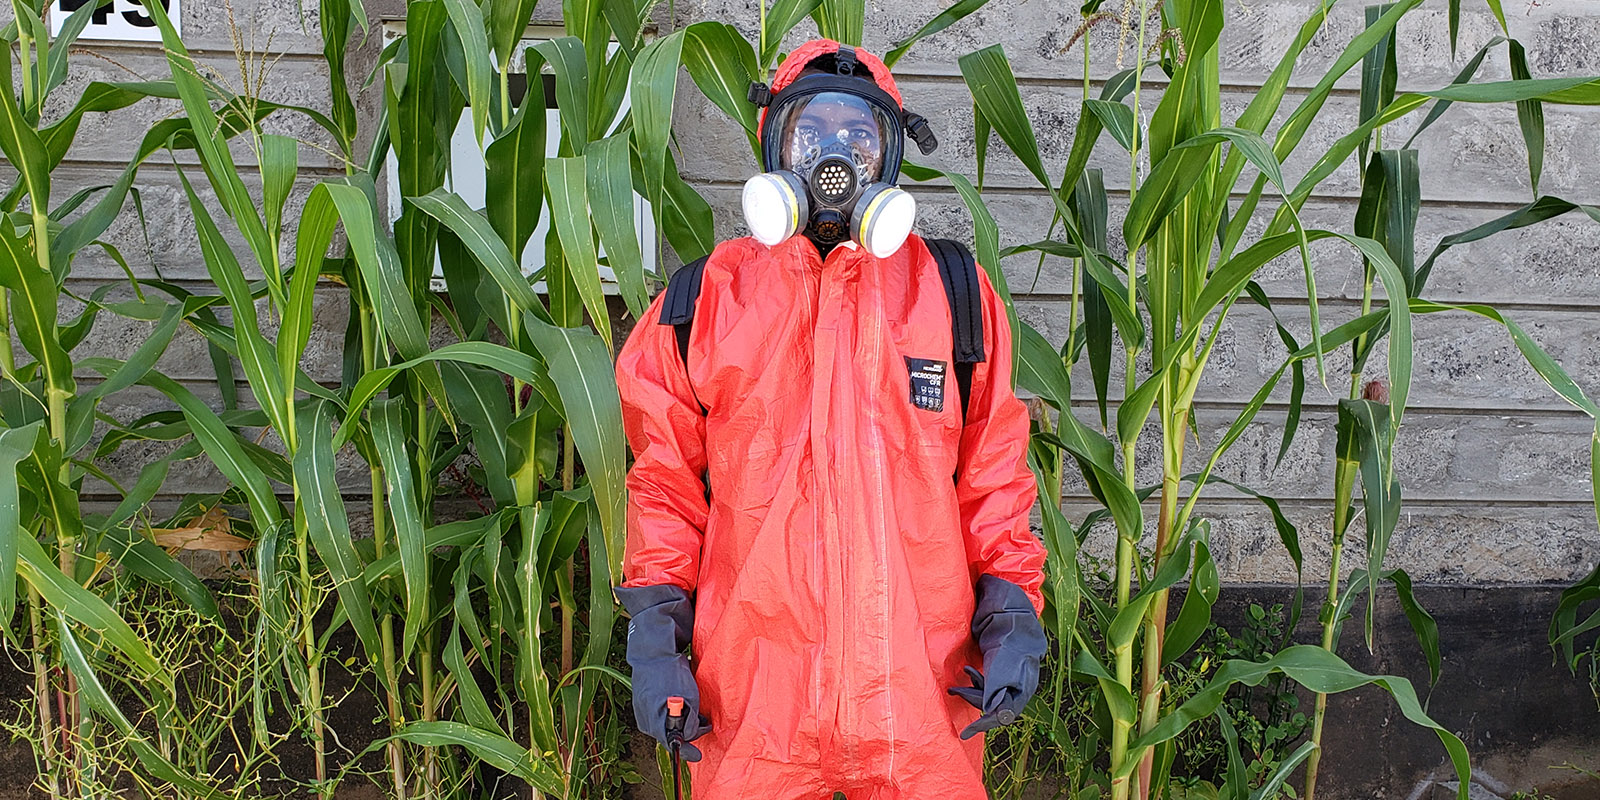 Farmers need to use appropriate personal protective equipment (PPE) during all stages of pesticide handling to ensure their overall health and safety.